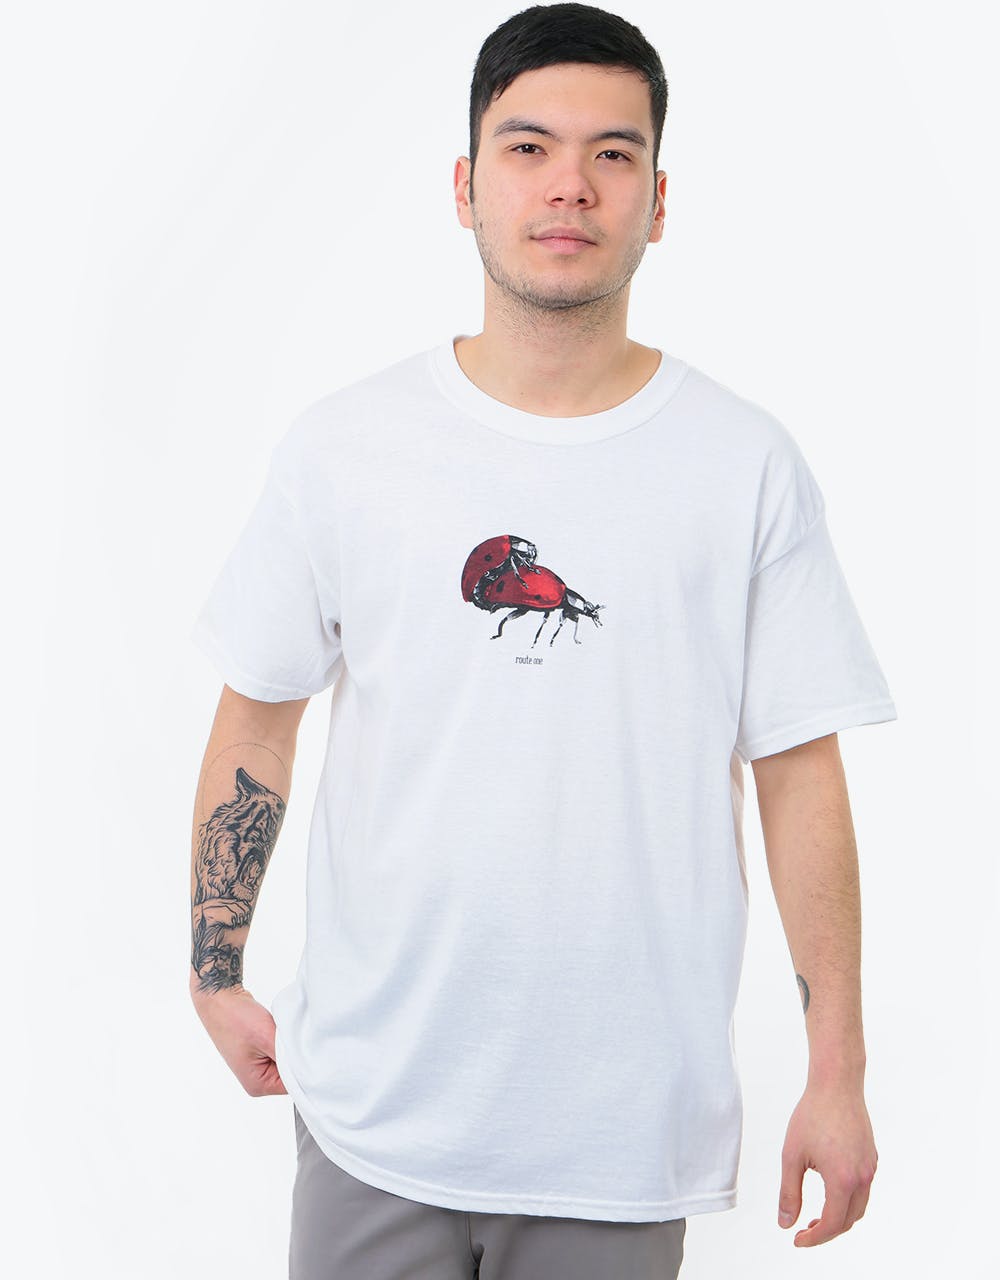 Route One Mate T-Shirt - White